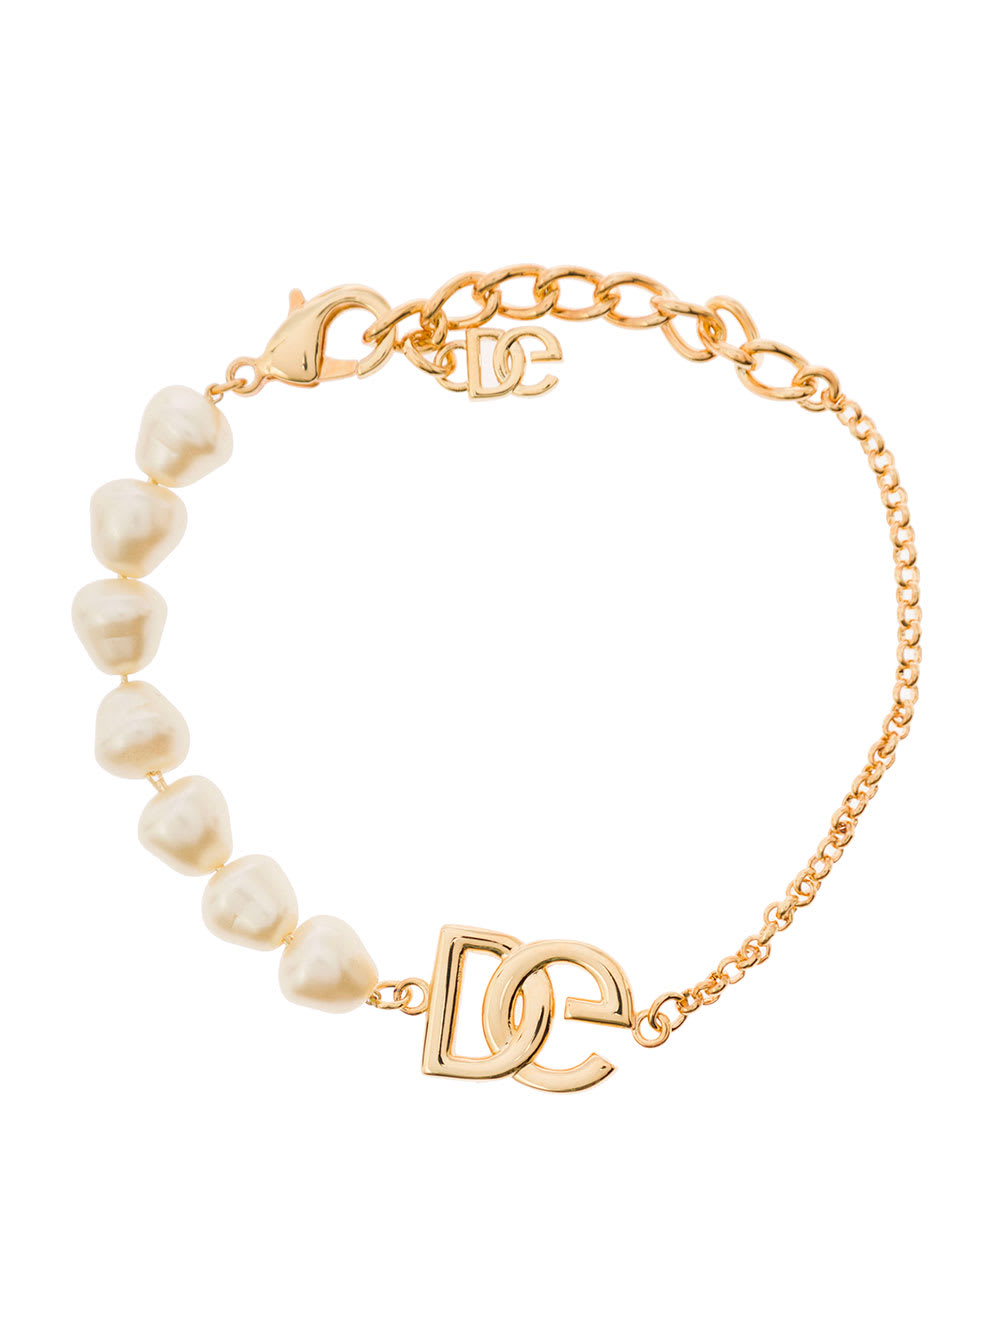 DOLCE & GABBANA GOLD-TONE BRACELET WITH LOGO PLACQUE AND PEARL DETAILING IN BRASS WOMAN